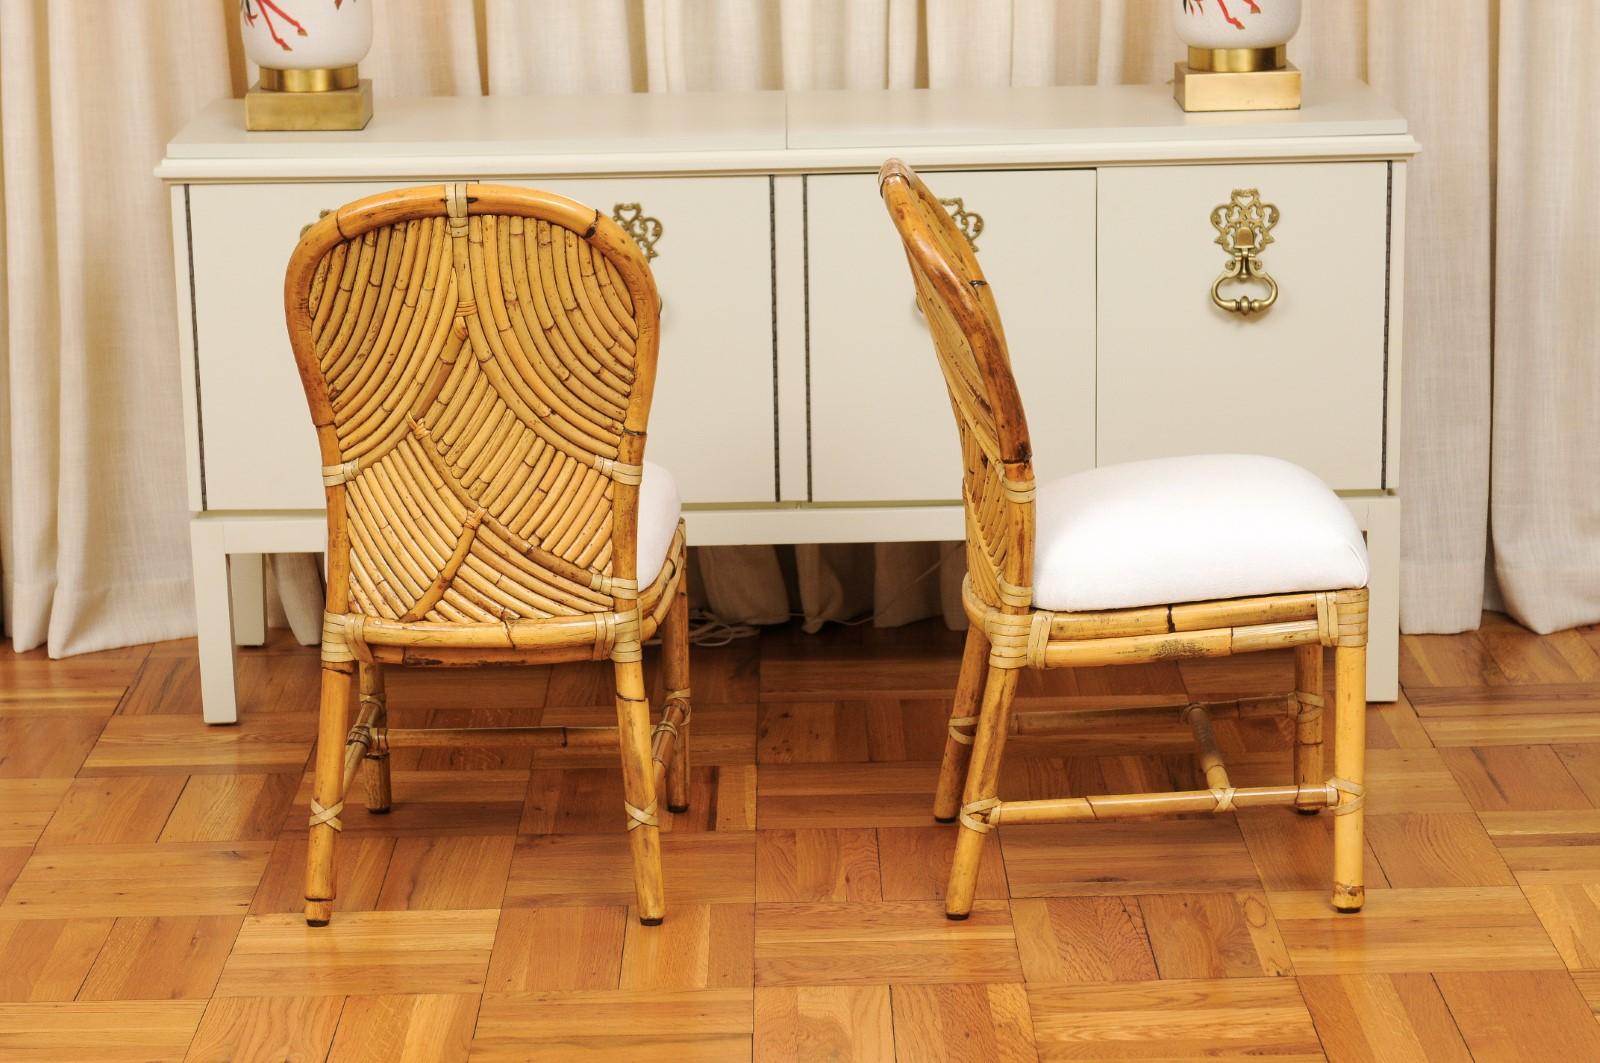 Stellar Restored Set of 8 Rattan Parquetry Bistro Chairs by McGuire, circa 1975 In Excellent Condition For Sale In Atlanta, GA